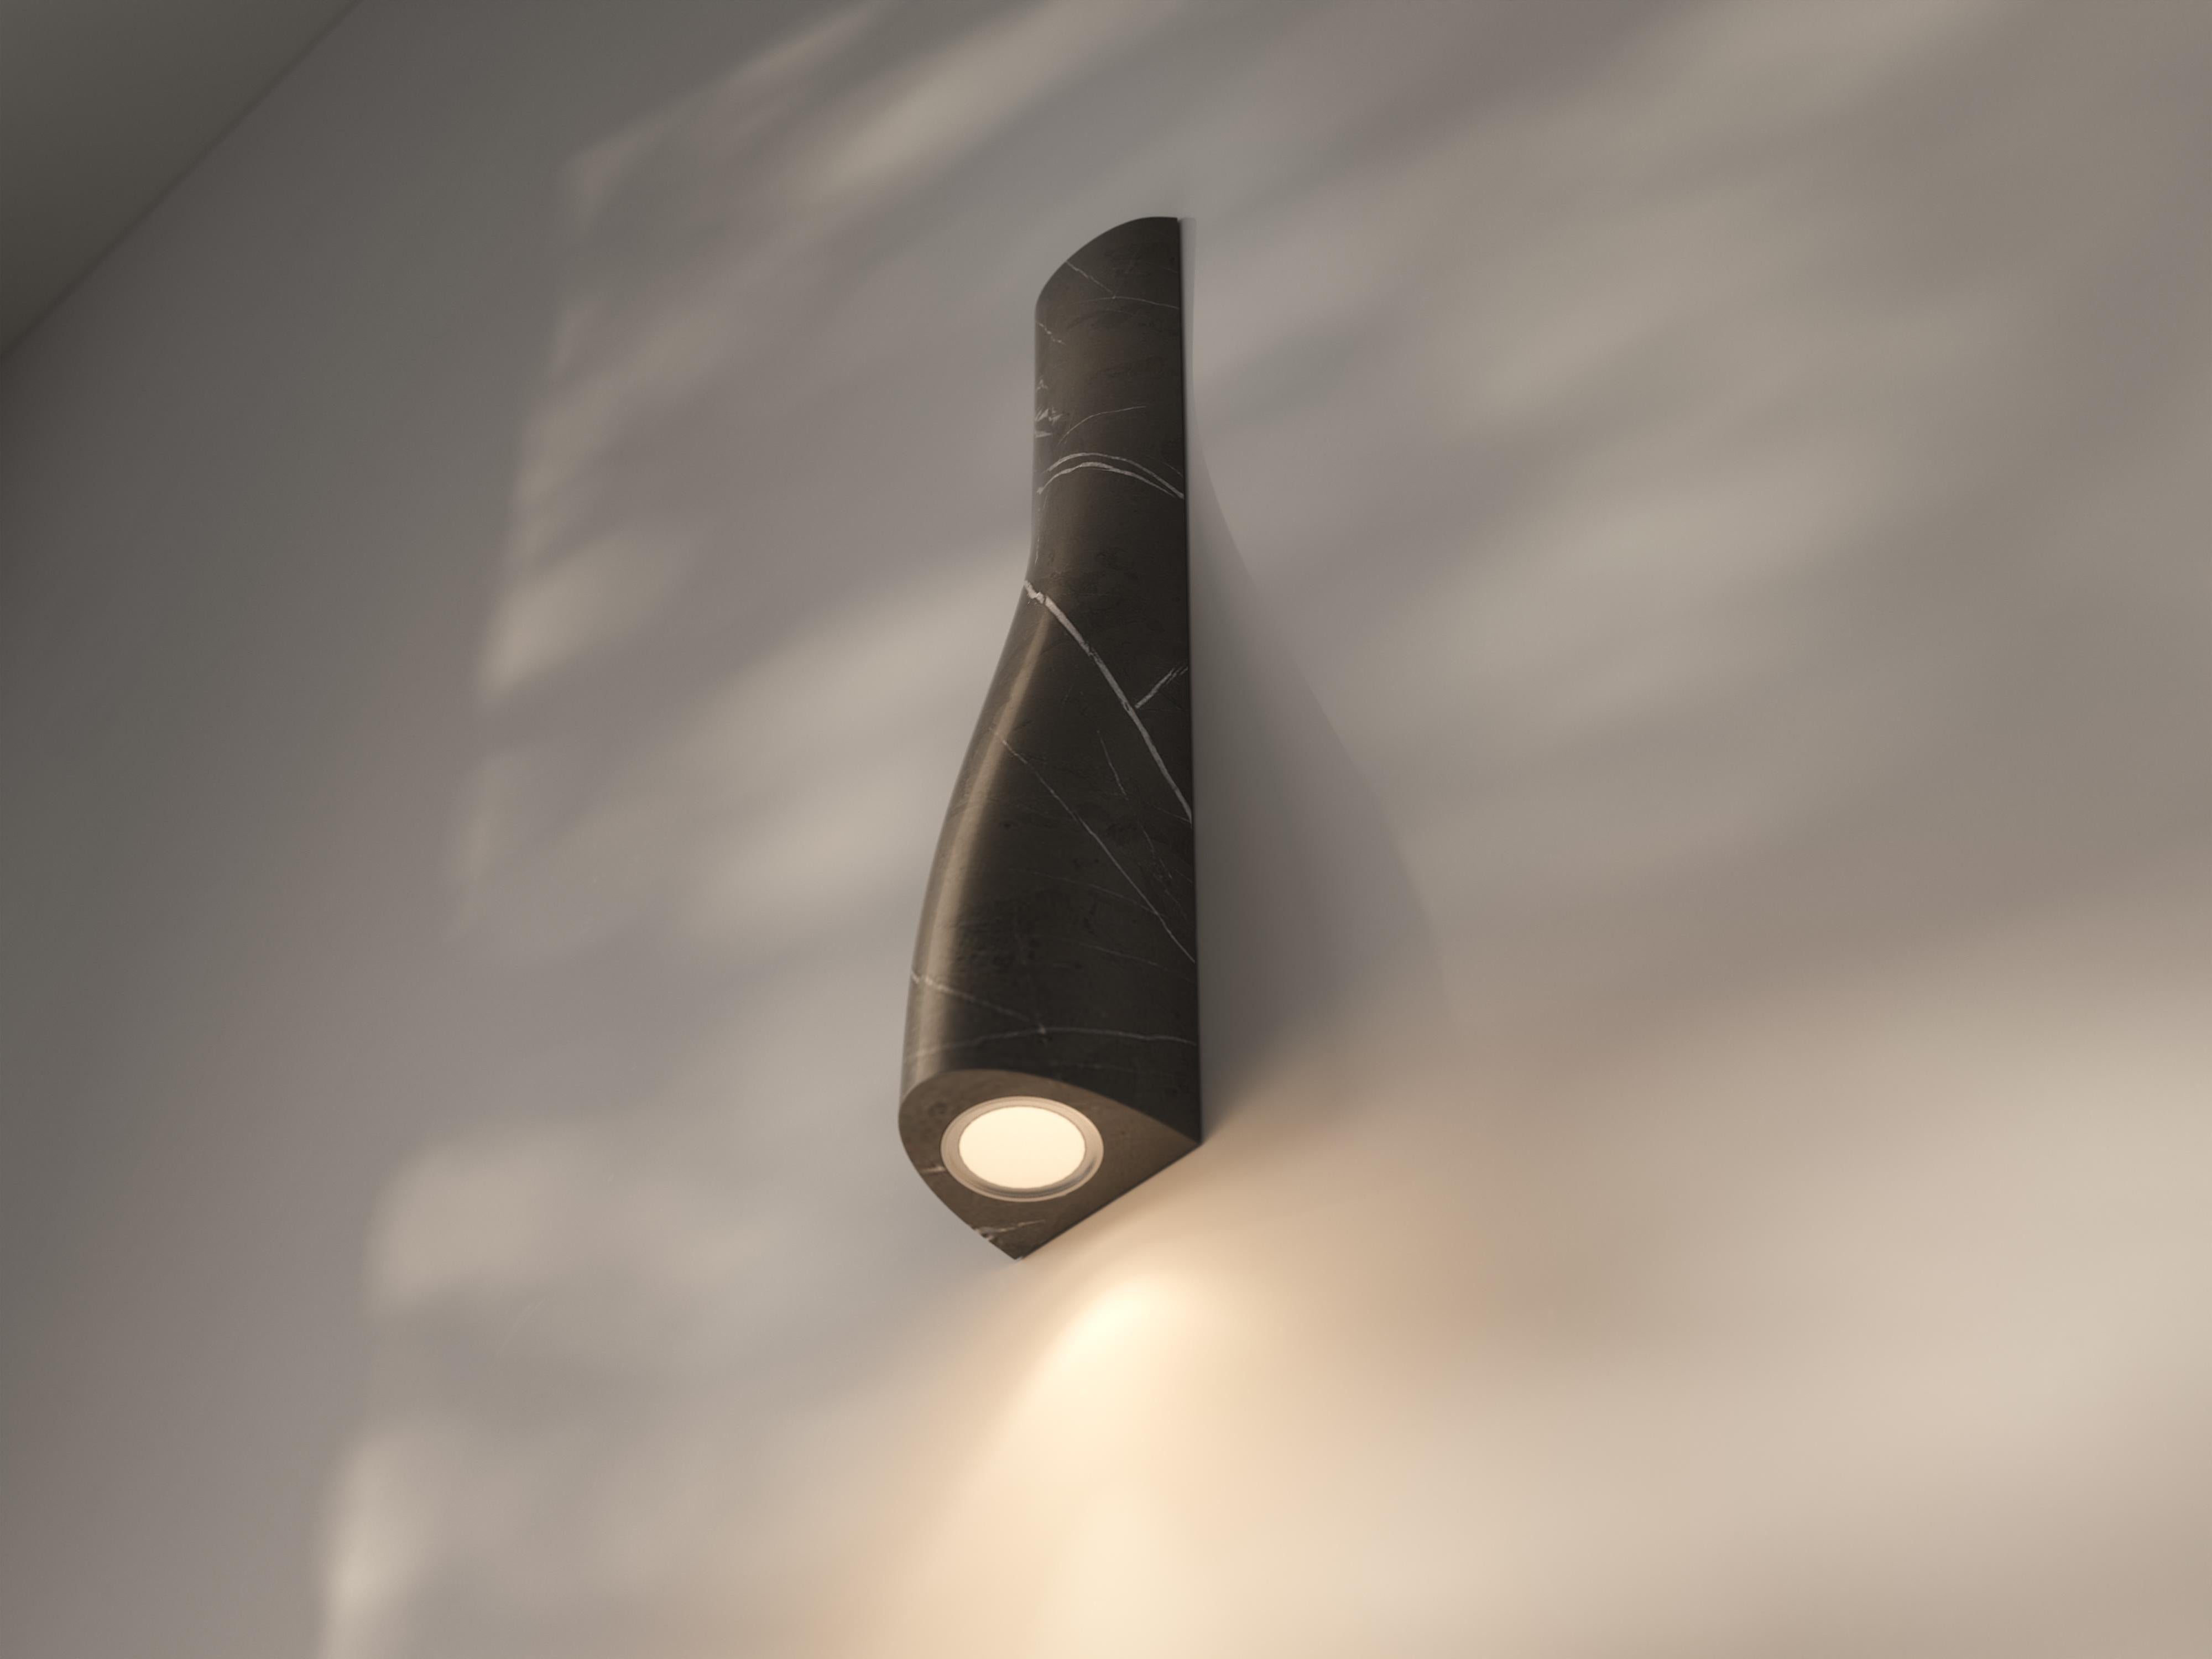 Ula sculpture black sconce by Veronica Mar
Dimensions: D40 x W40 x H60 cm
Materials: Marble
Weight: 90 kg.
Numbered and limited edition

Ula sculpture sconce can be a bespoke piece. Custom Dimensions and type of marble Available Upon Request.